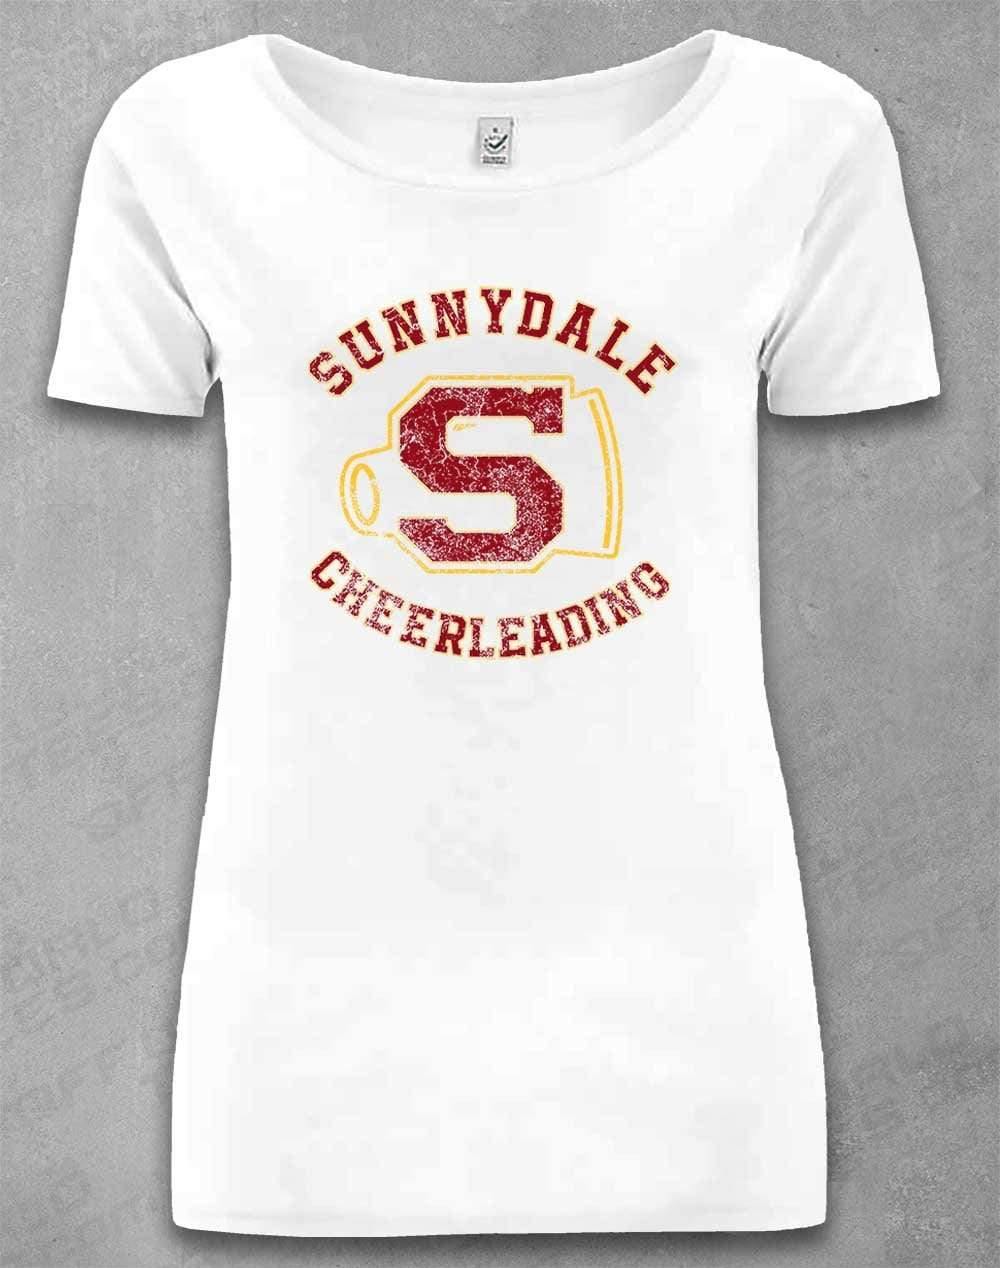 DELUXE Sunnydale Cheerleading Organic Scoop Neck T-Shirt 8-10 / White  - Off World Tees